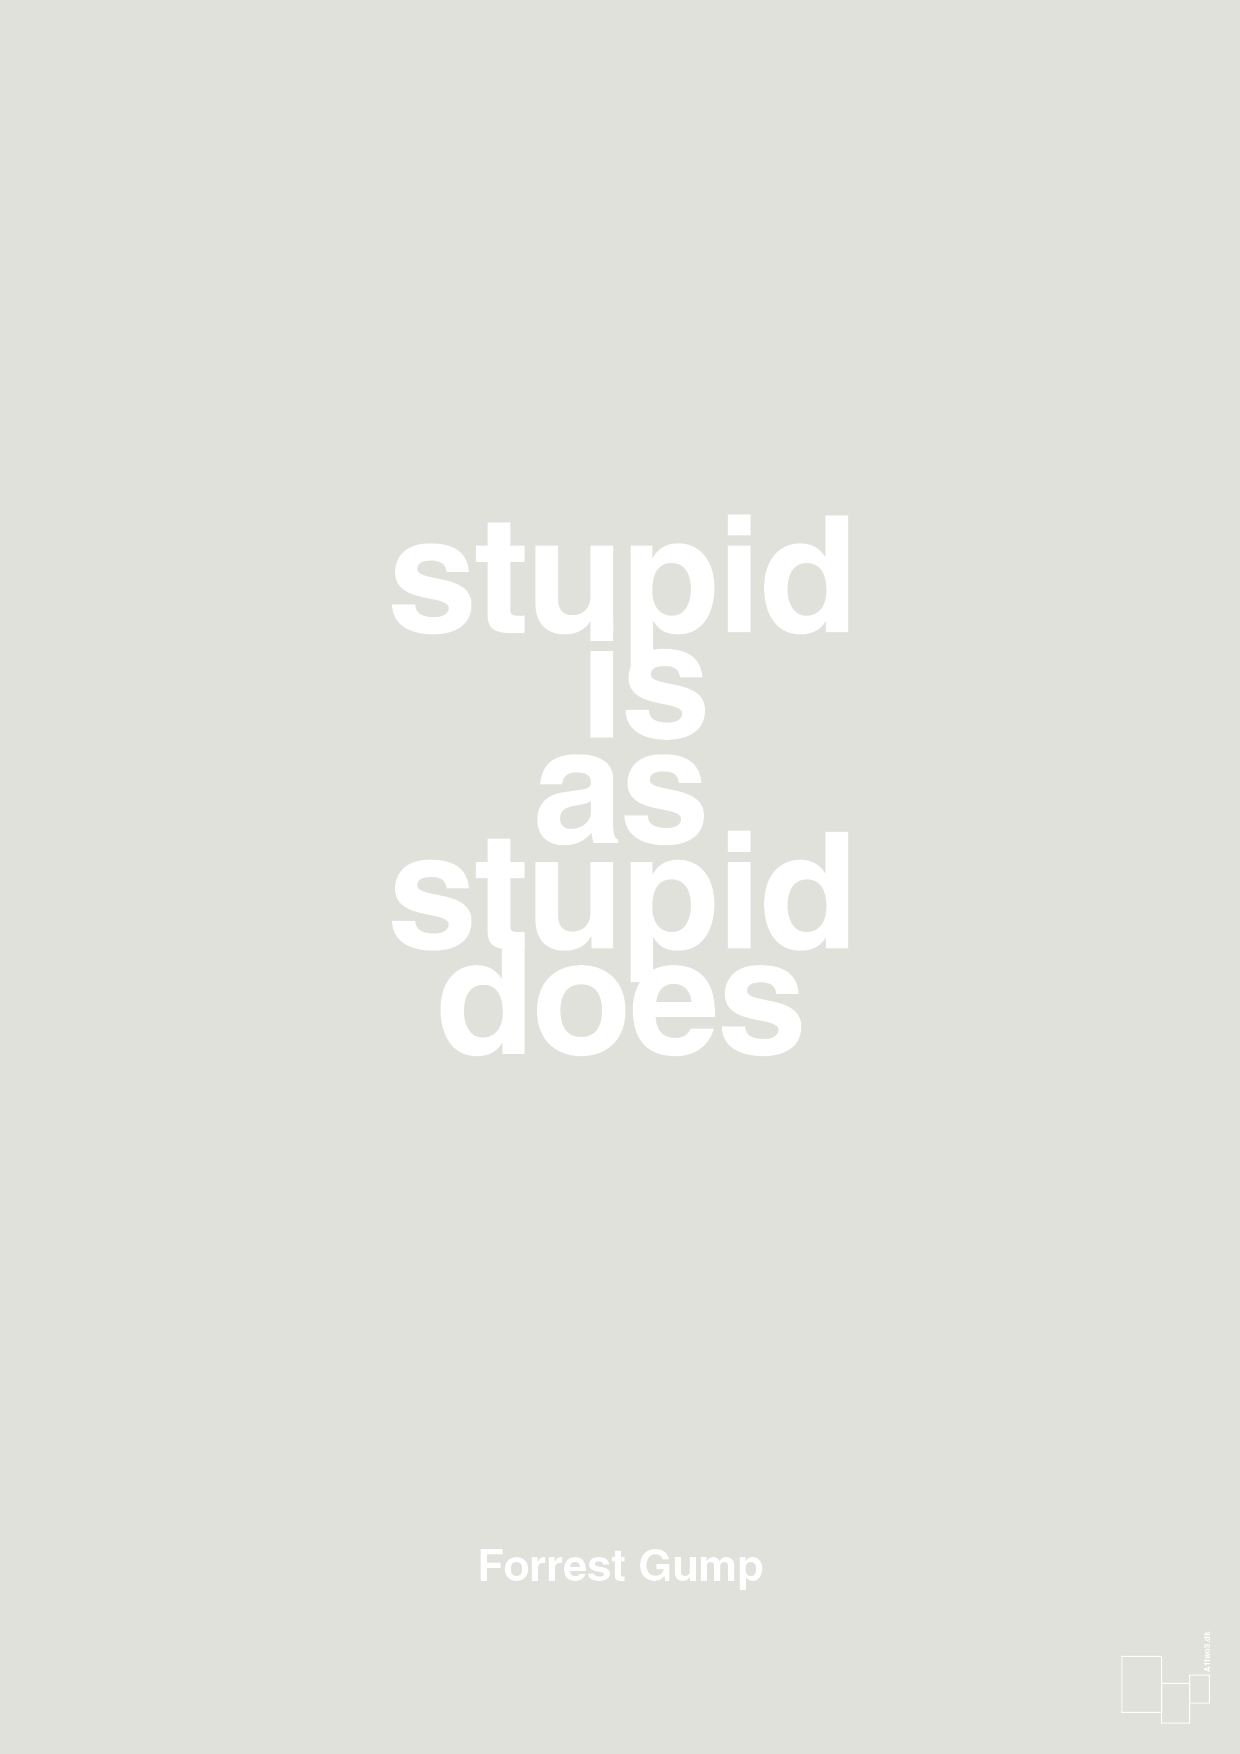 stupid is as stupid does - Plakat med Citater i Painters White